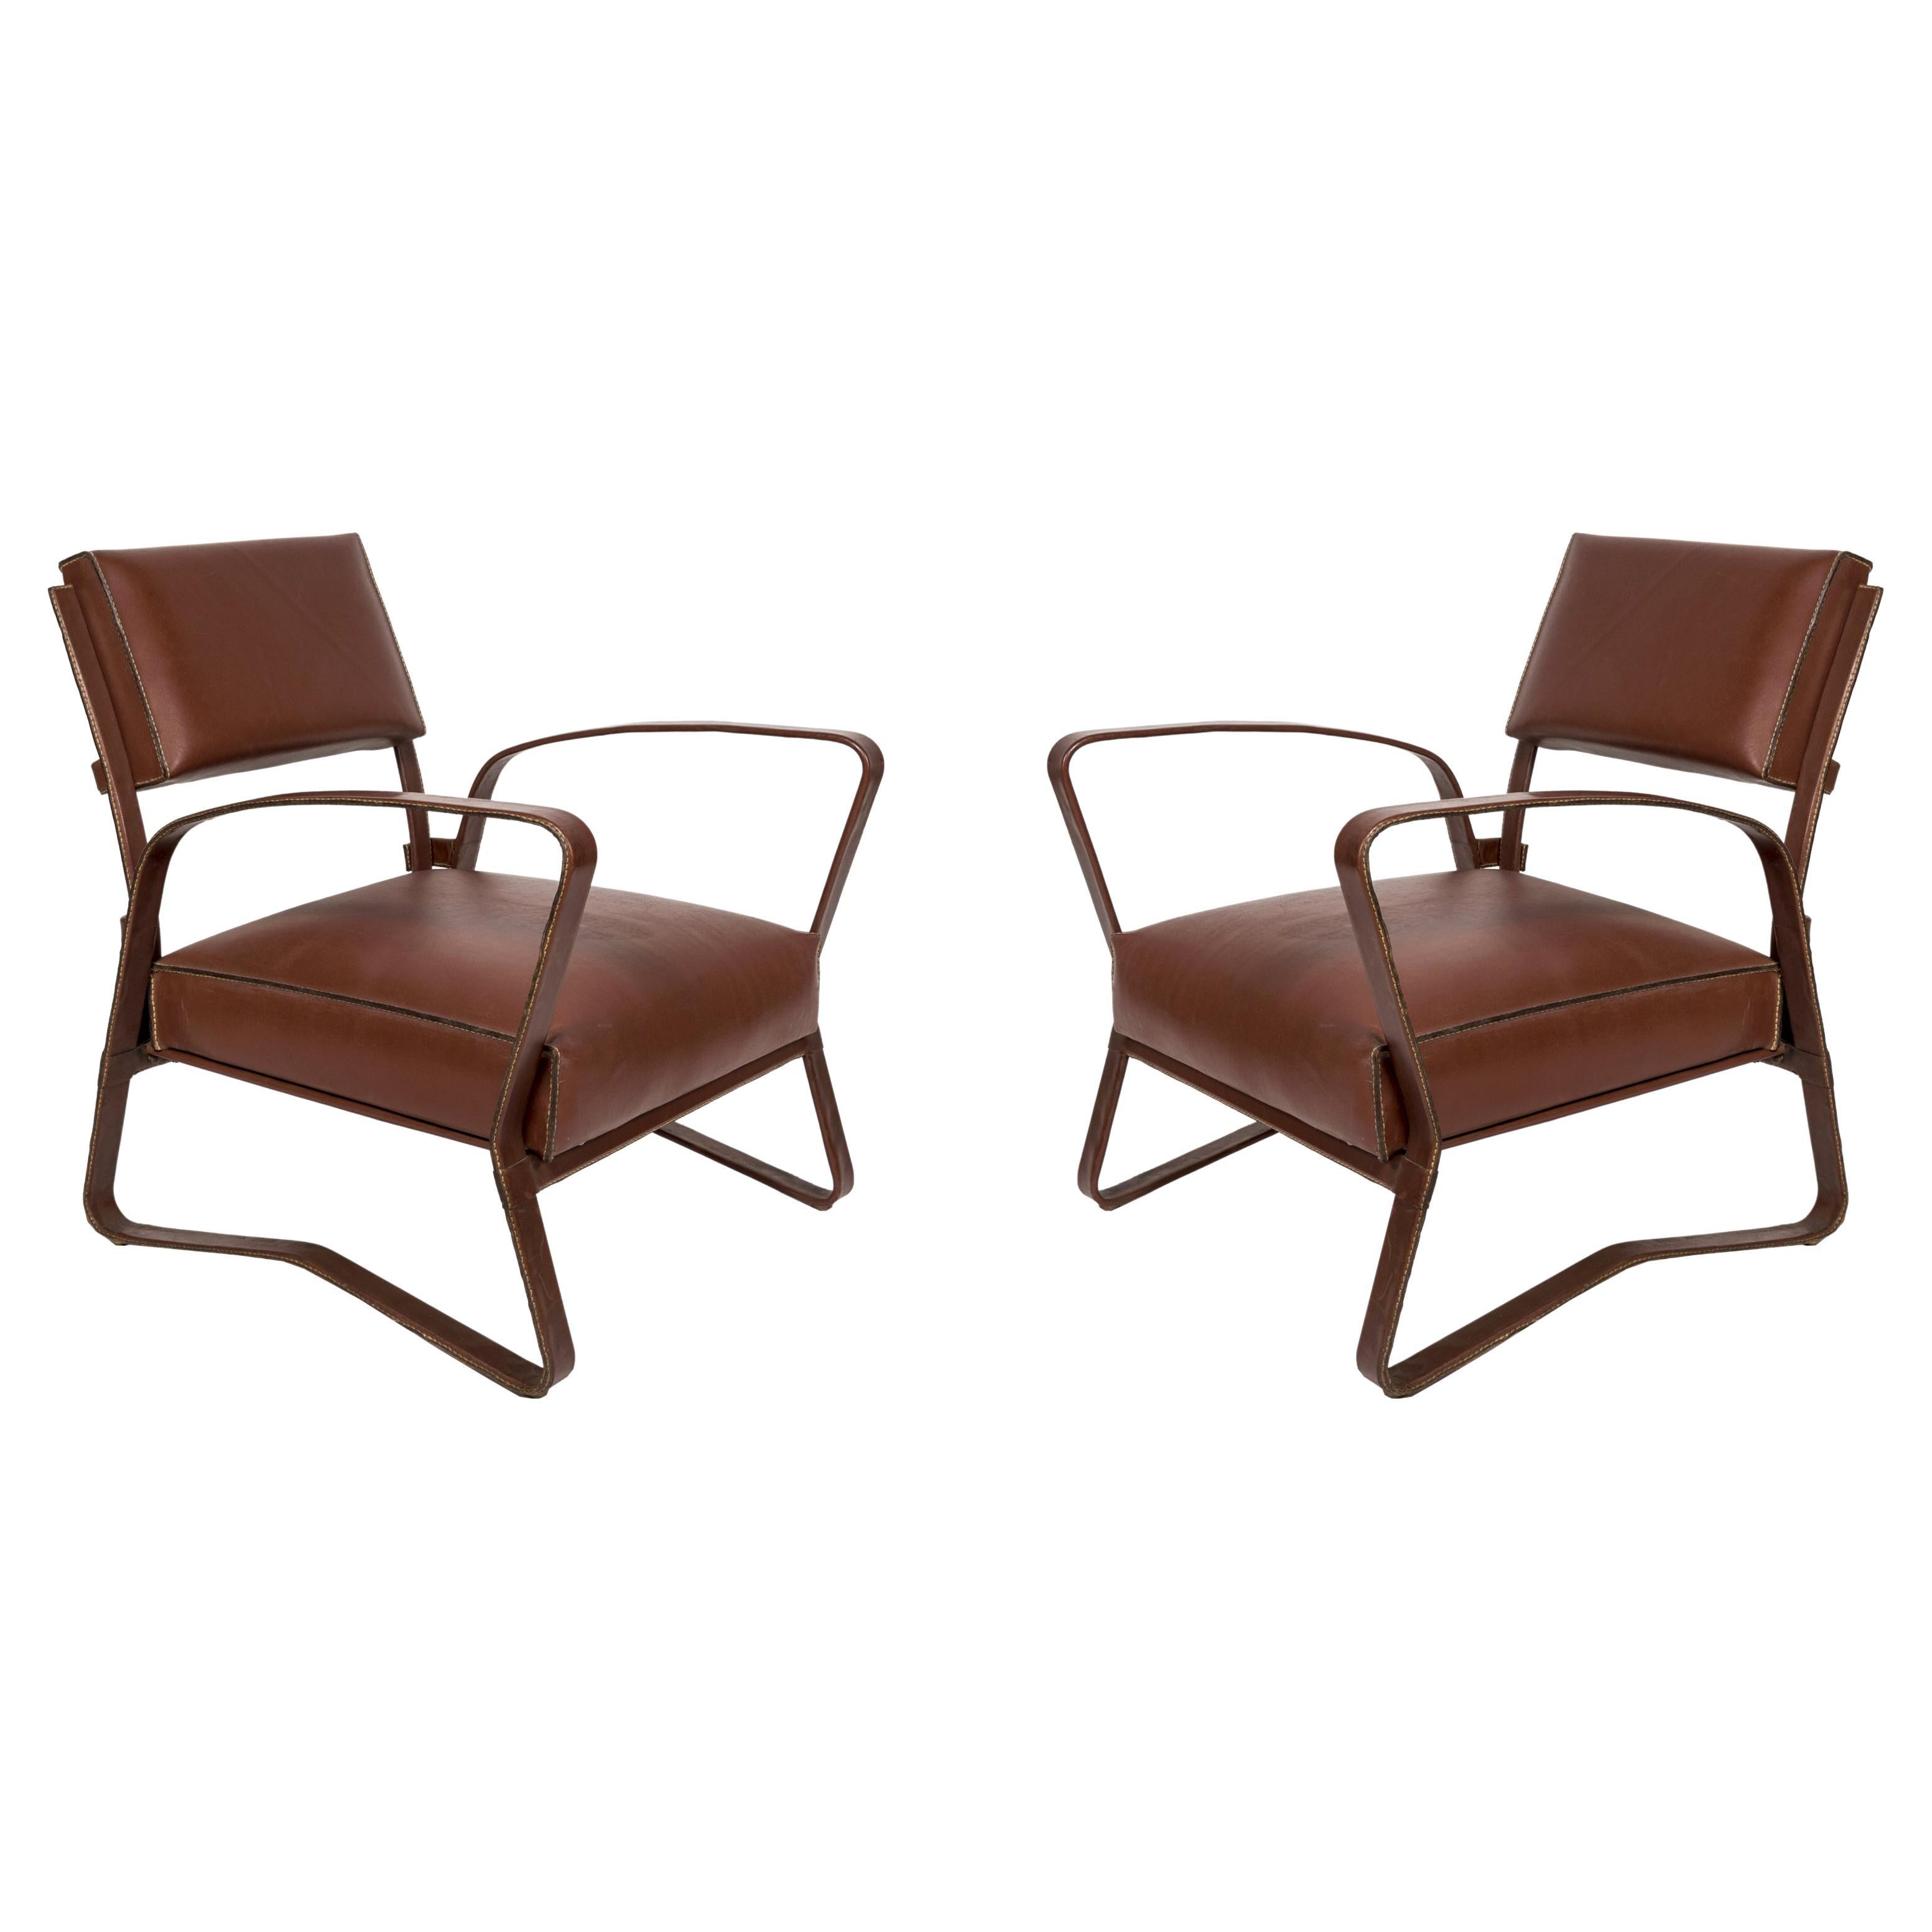 Pair of 1950's Stitched Leather Armchairs by Jacques Adnet For Sale